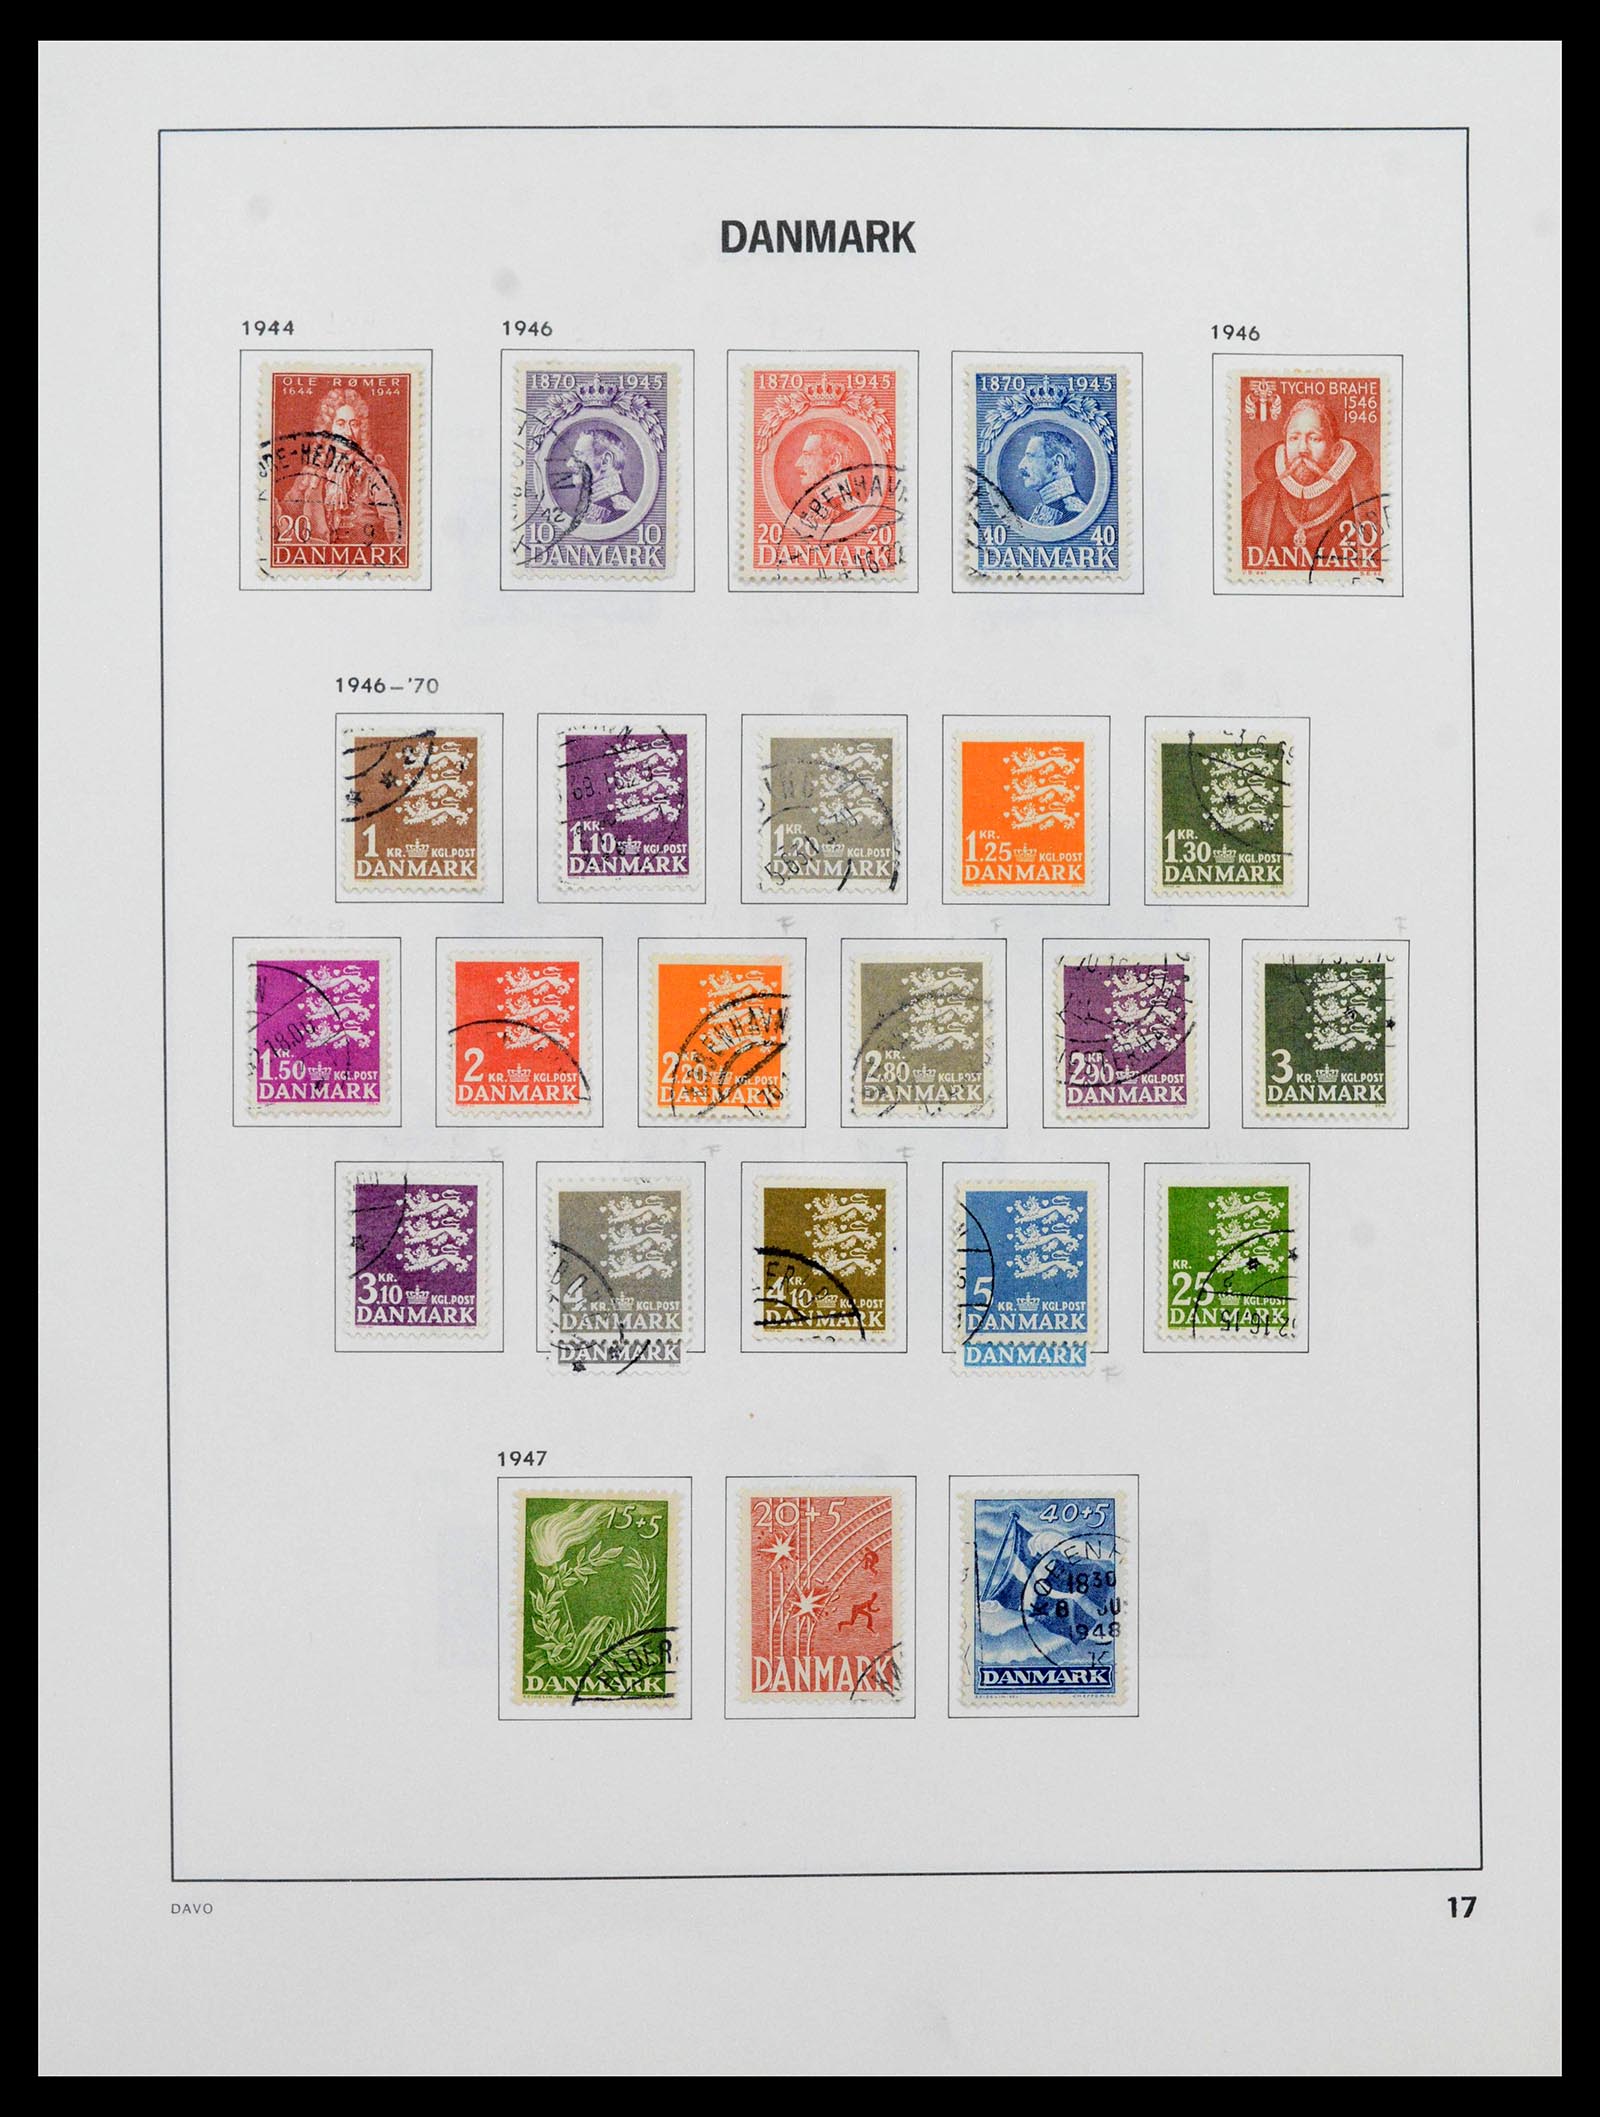 39428 0019 - Stamp collection 39428 Denmark 1851-2019.